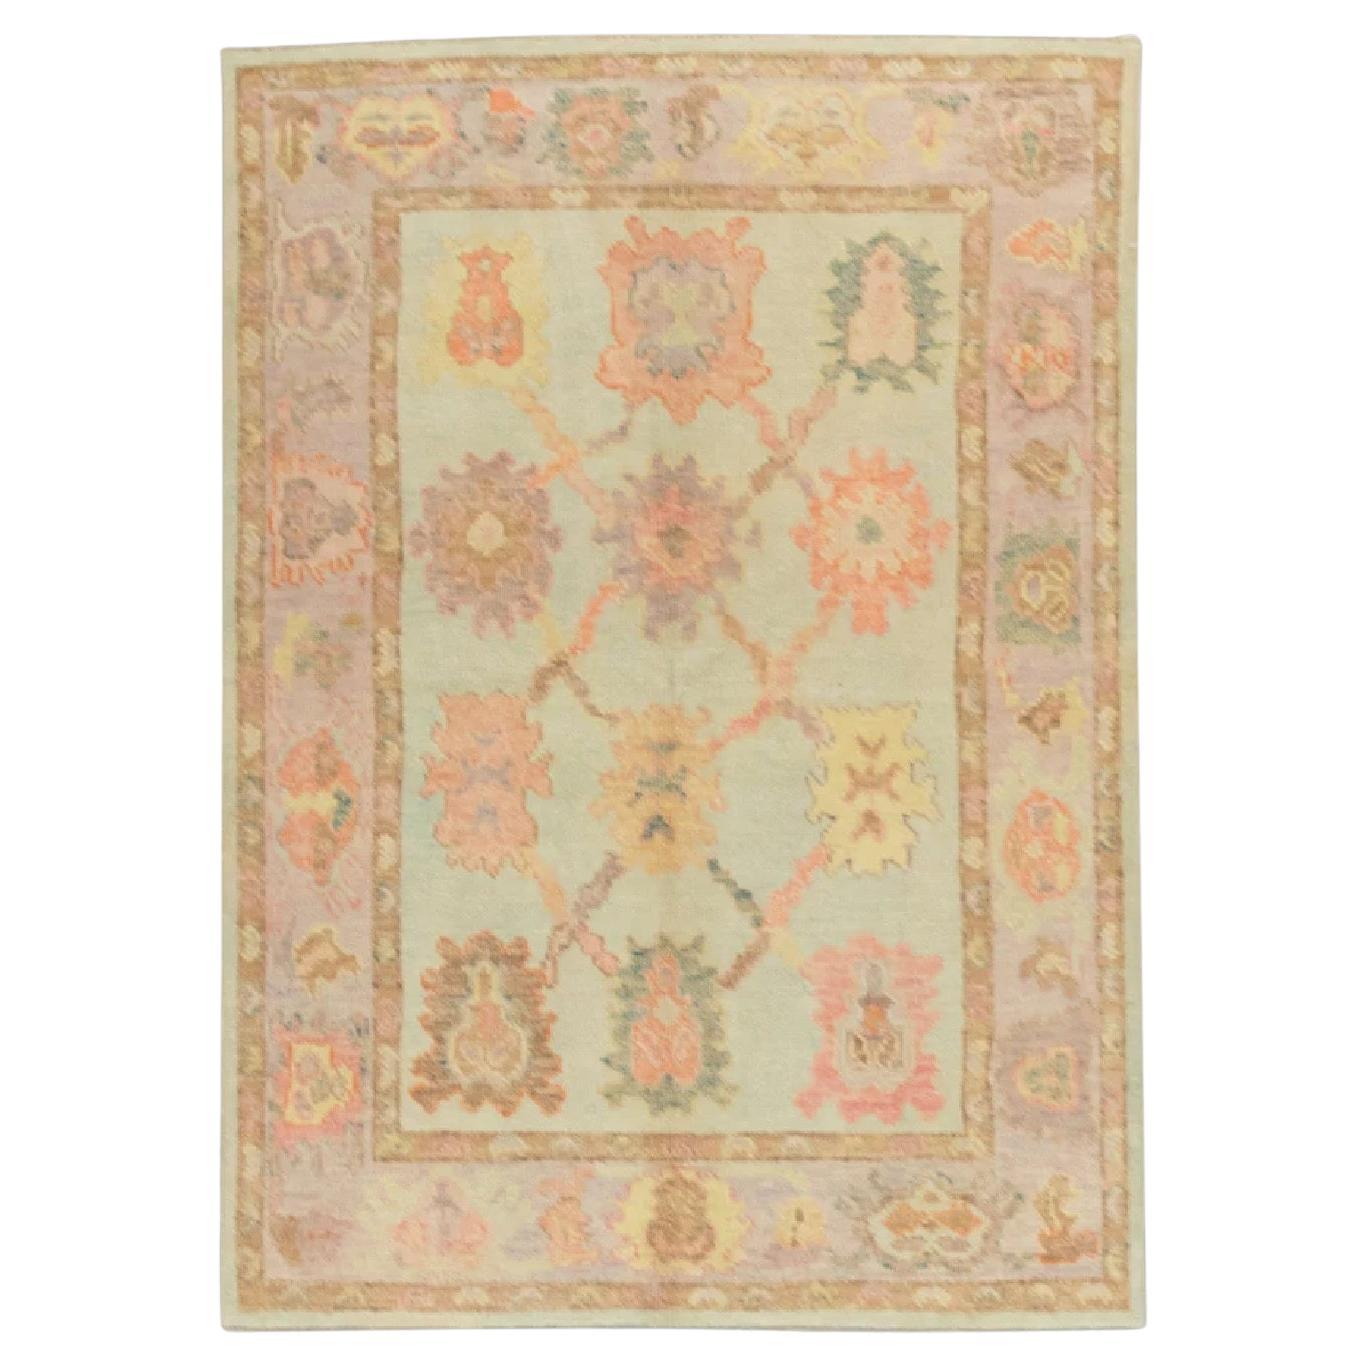 Blue & Pink Handwoven Wool Turkish Oushak Rug 3'11" x 5'5" For Sale